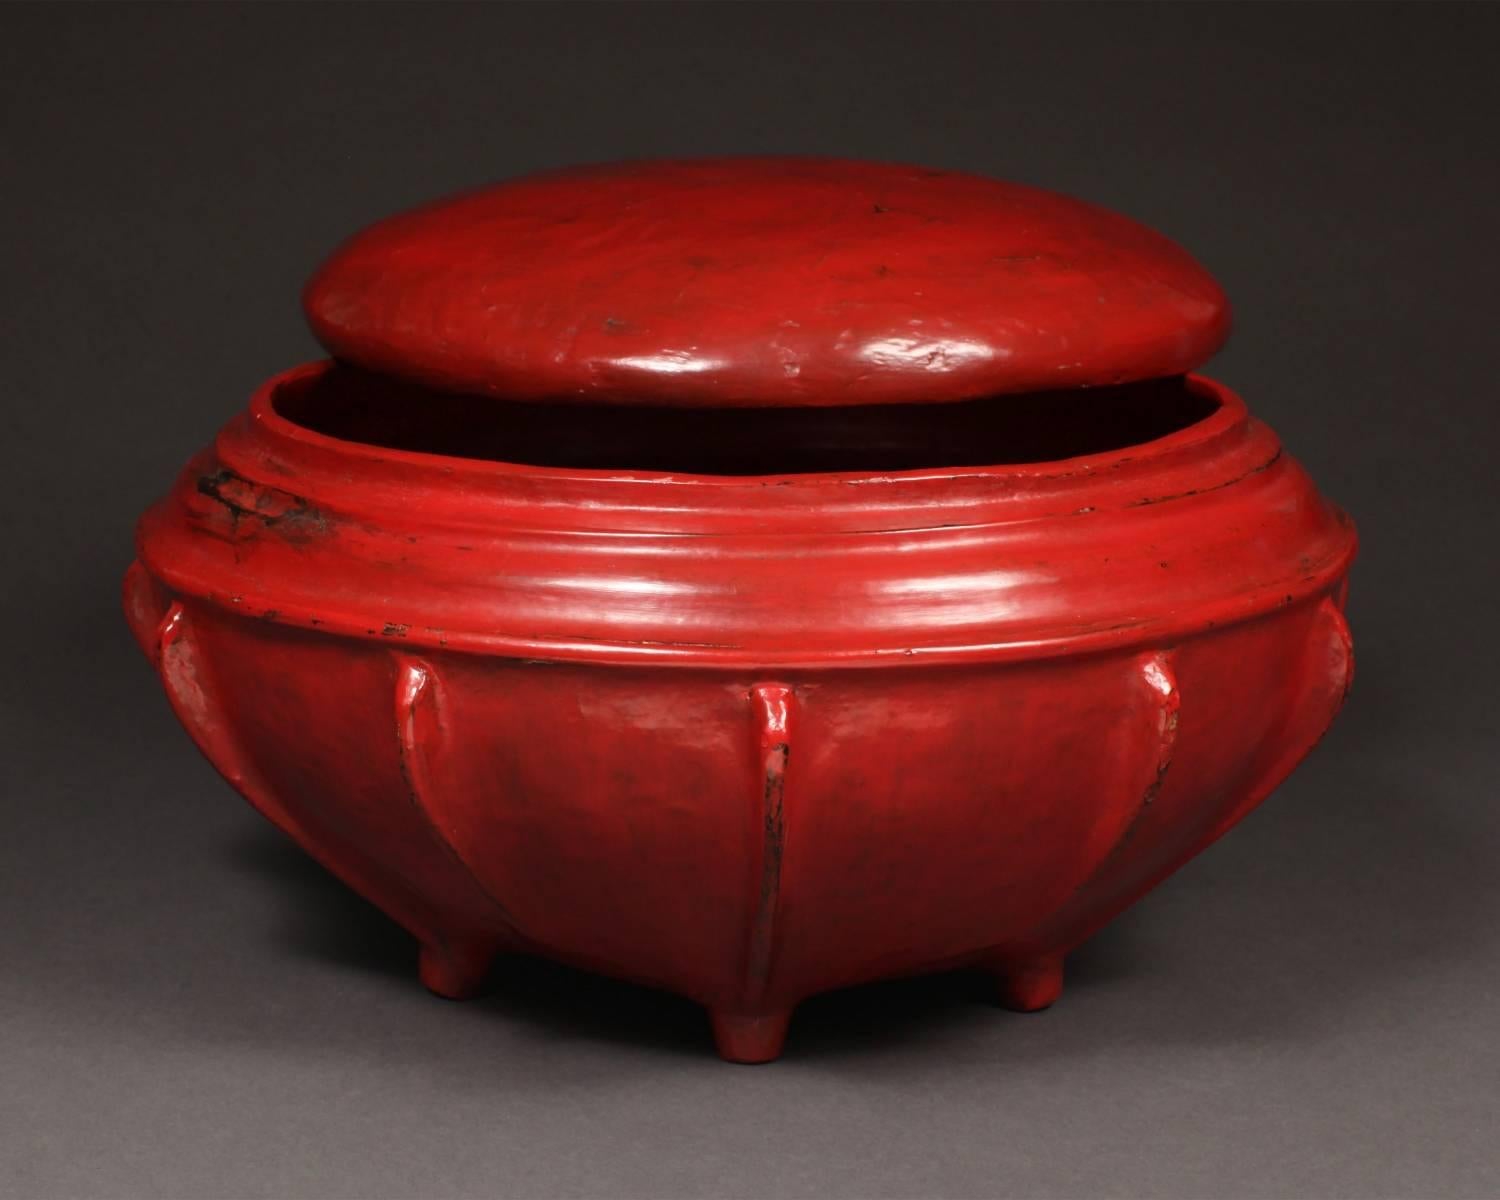 Tribal Late 19th-Early 20th Century Lacquered Offering Vessel, Hsun-ok, Burma